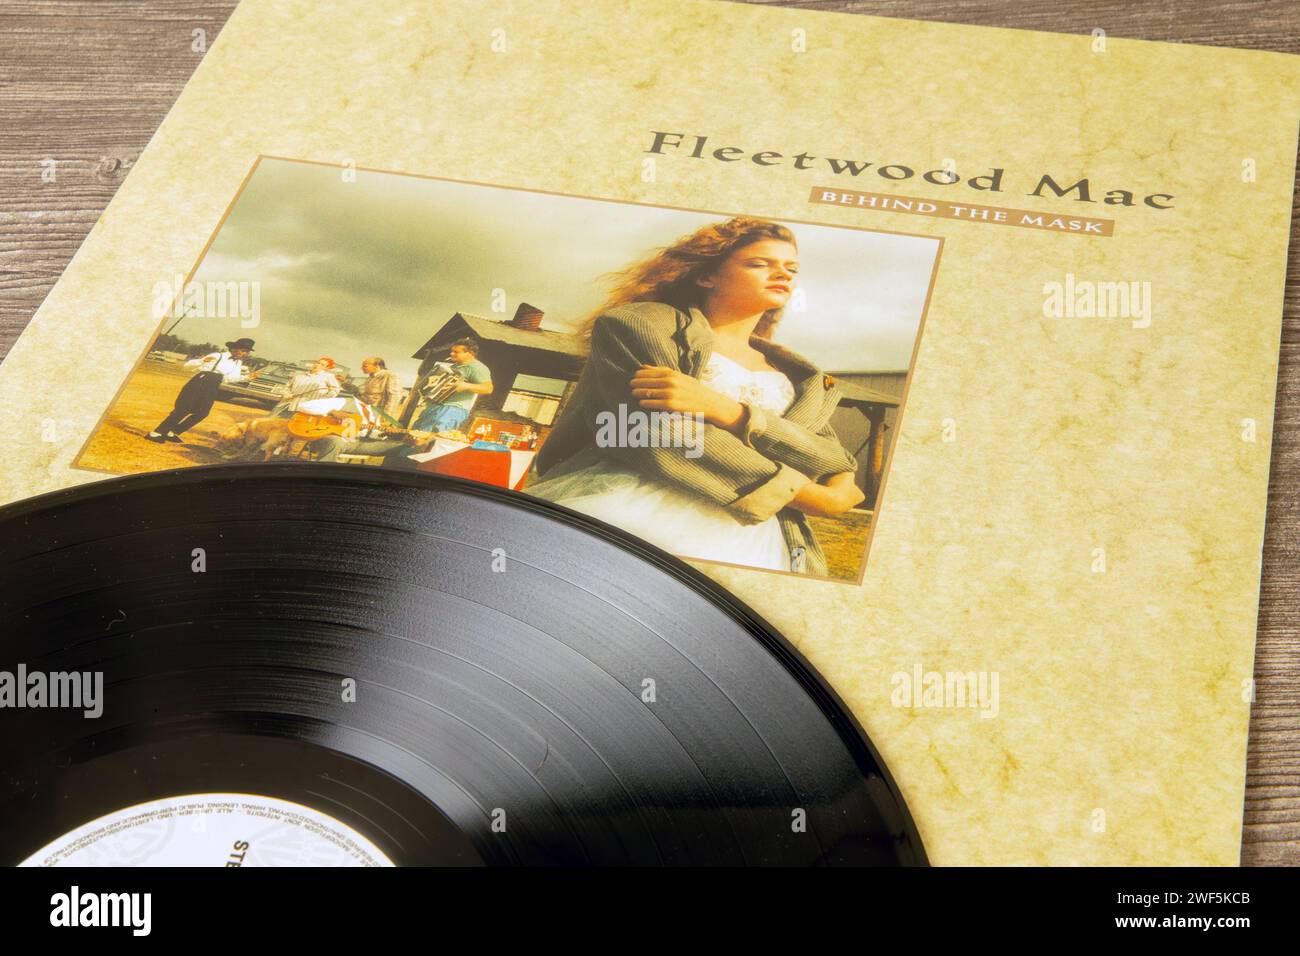 Cover of the album BEHIND THE MASK by the band FLEETWOOD MAC from 1990 Stock Photo